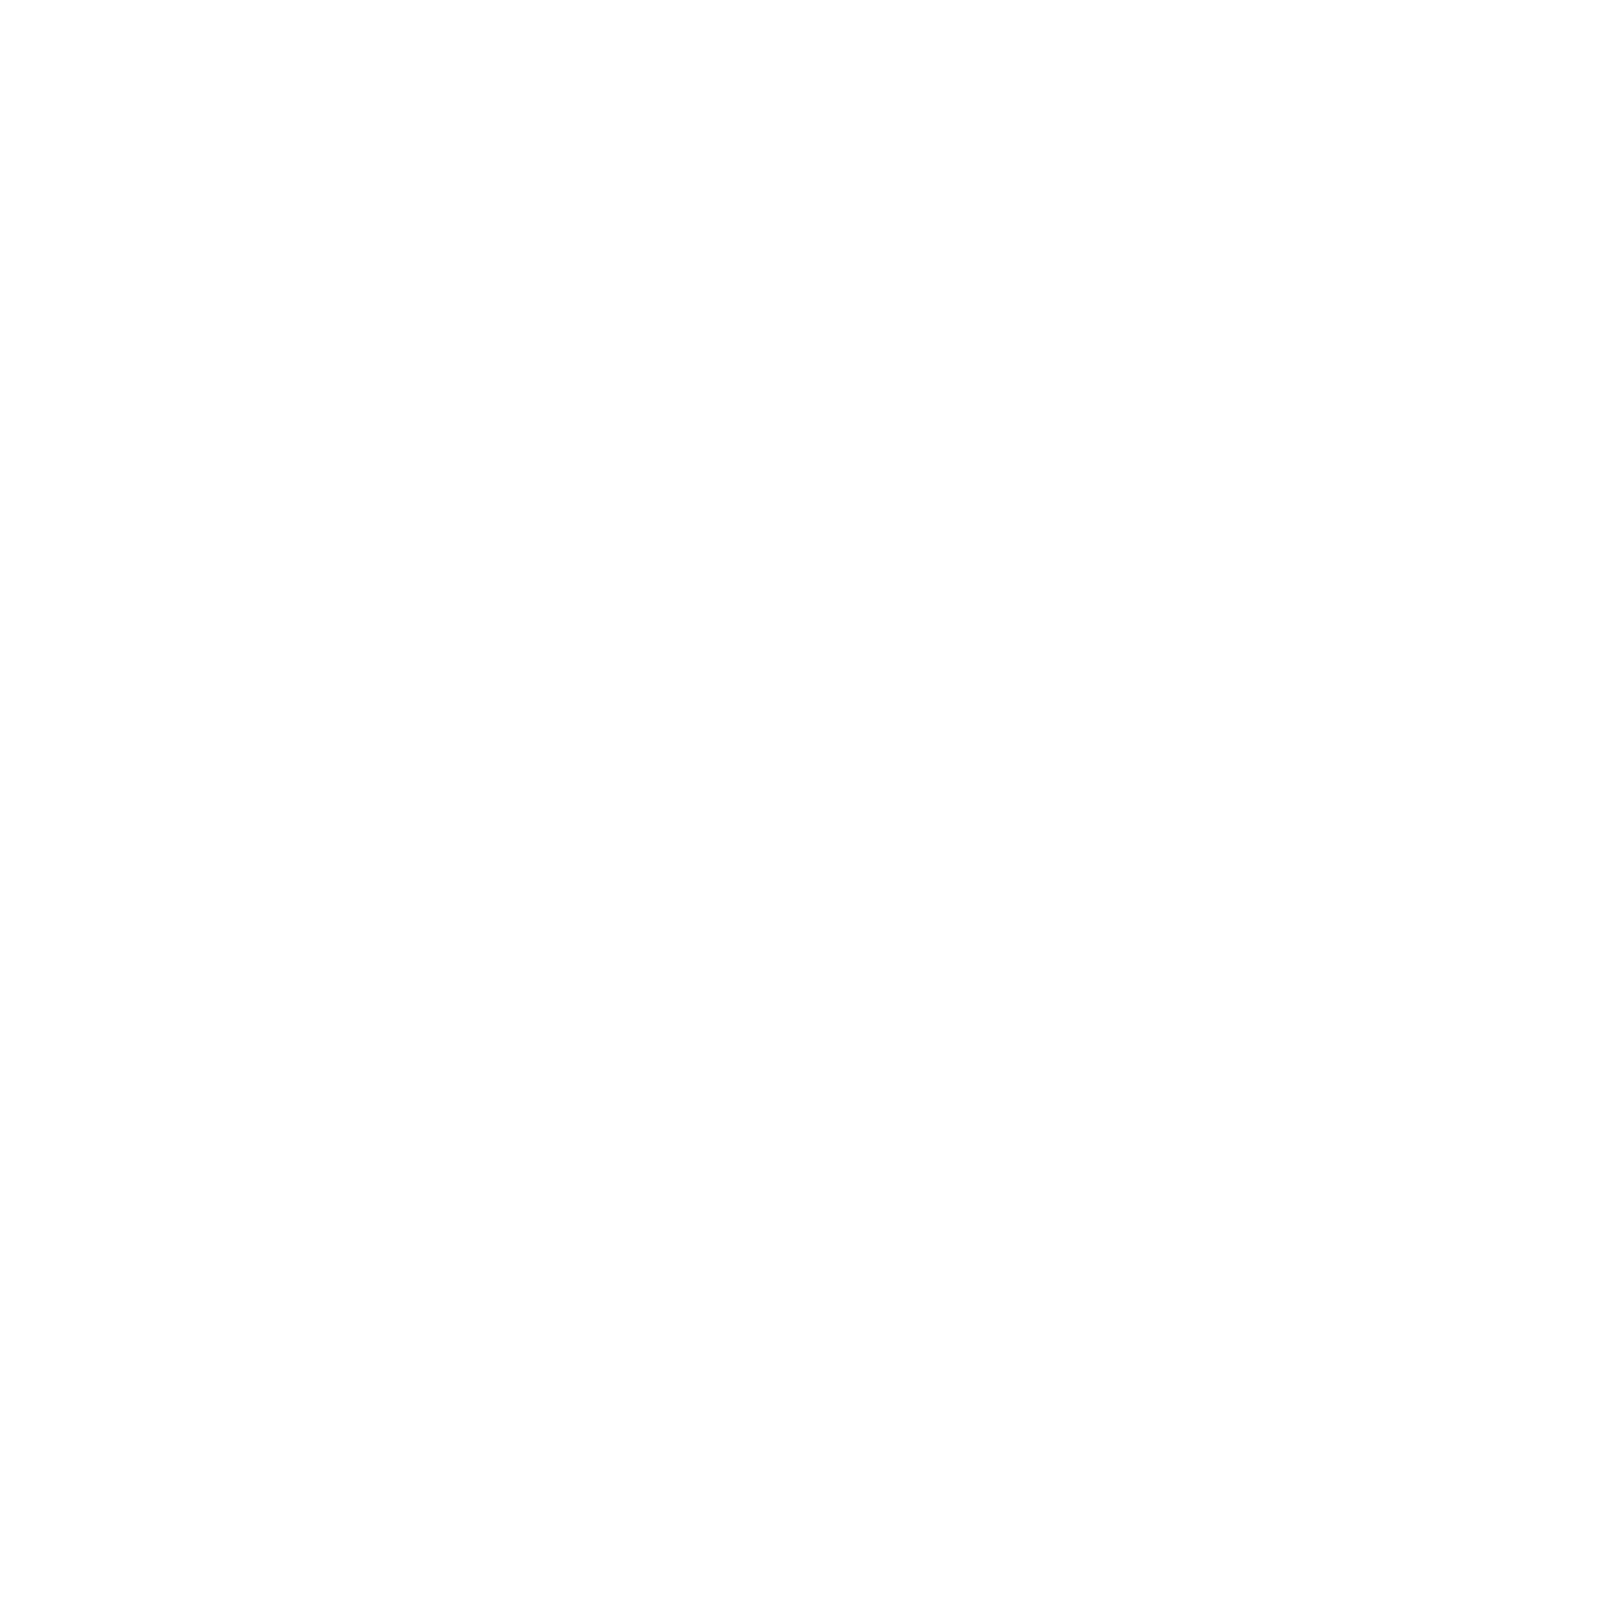 Icon illustrating the individual spring adaptation feature, highlighting the mattress's ability to conform to different body shapes for optimal support.